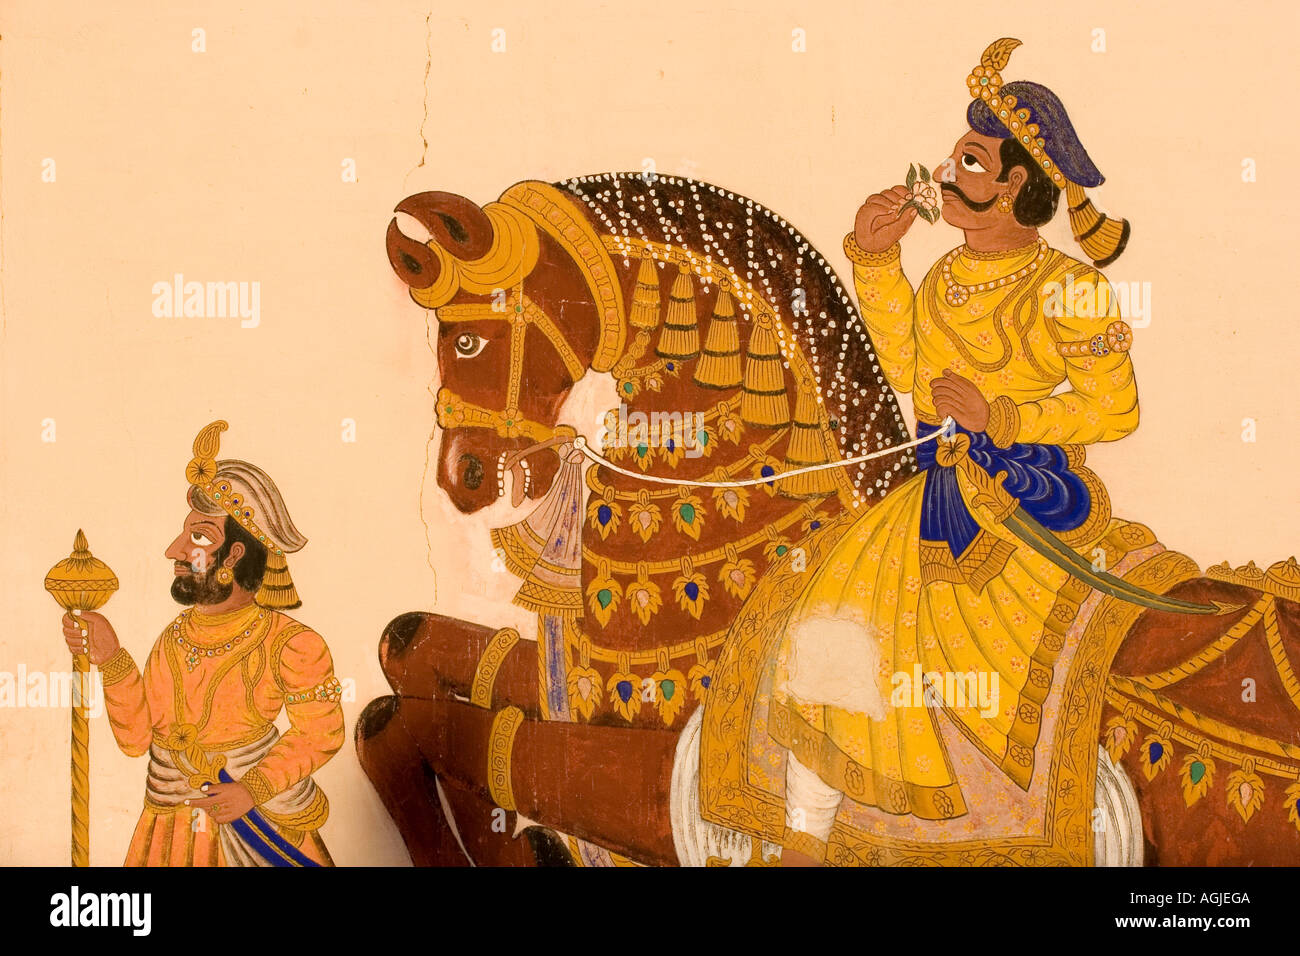 india wallpainting with horse and rider in udaipur rajasthan Stock Photo